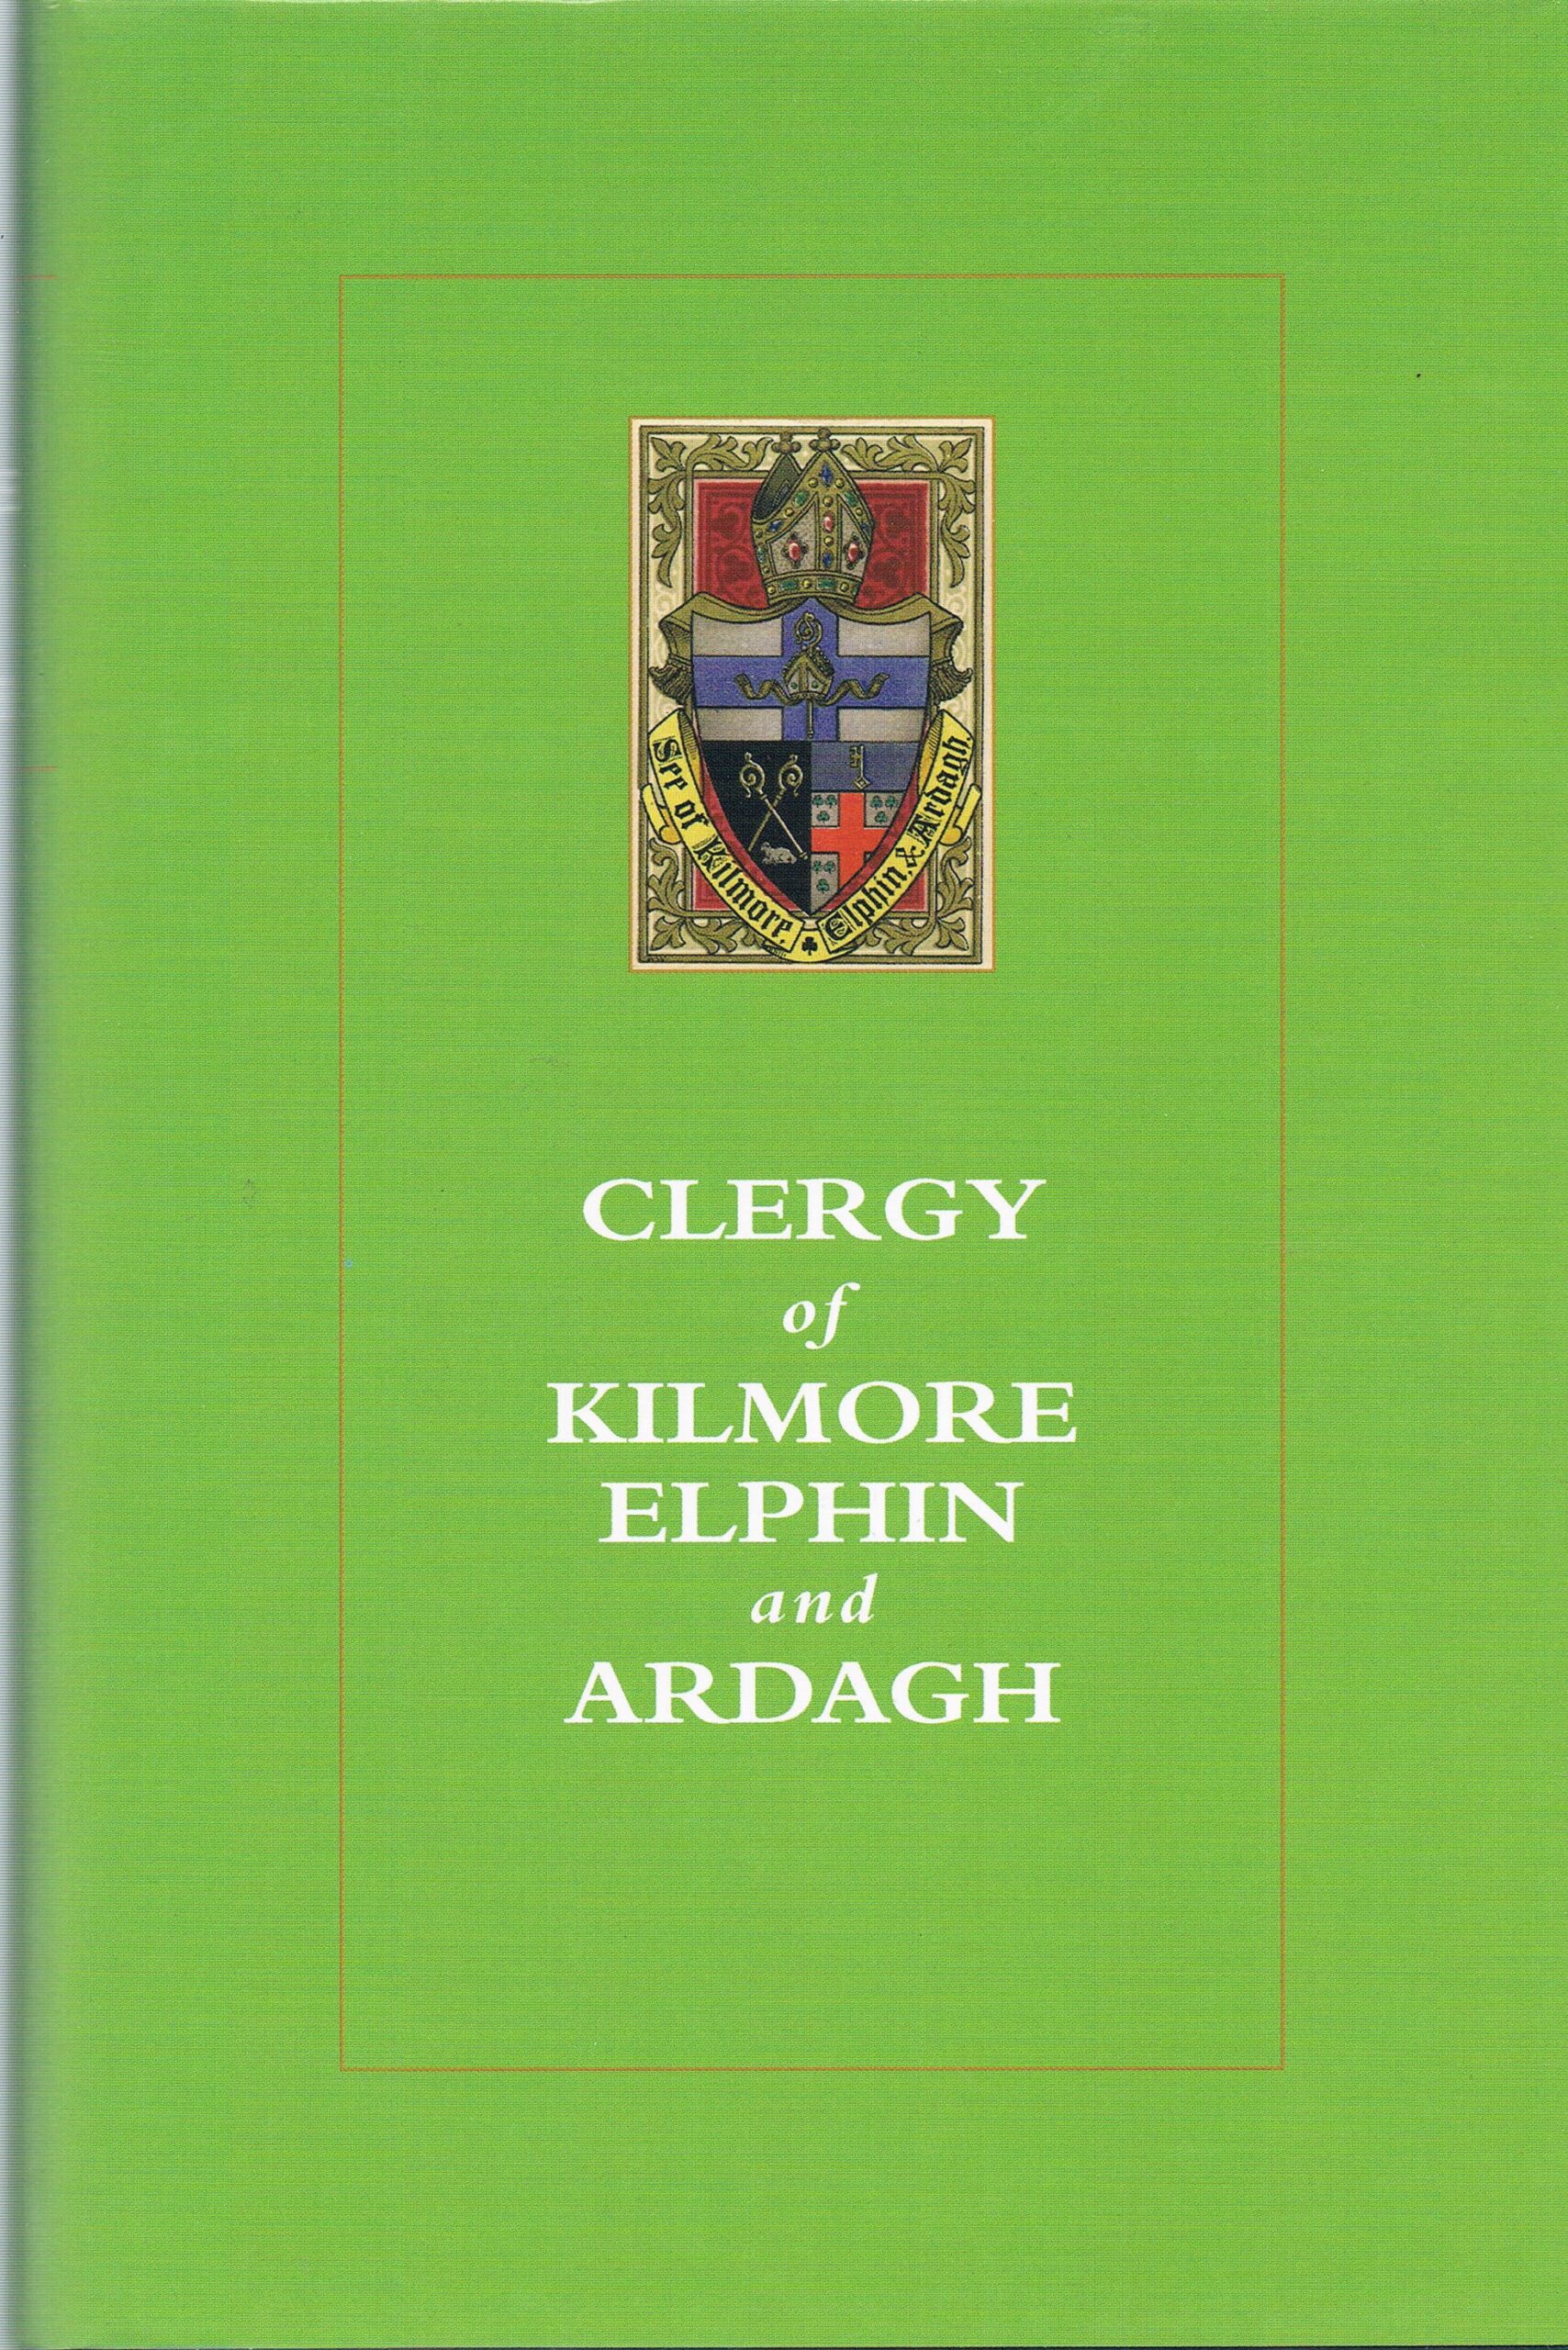 Clergy of Kilmore, Elphin and Ardagh by D.W.T. Crooks